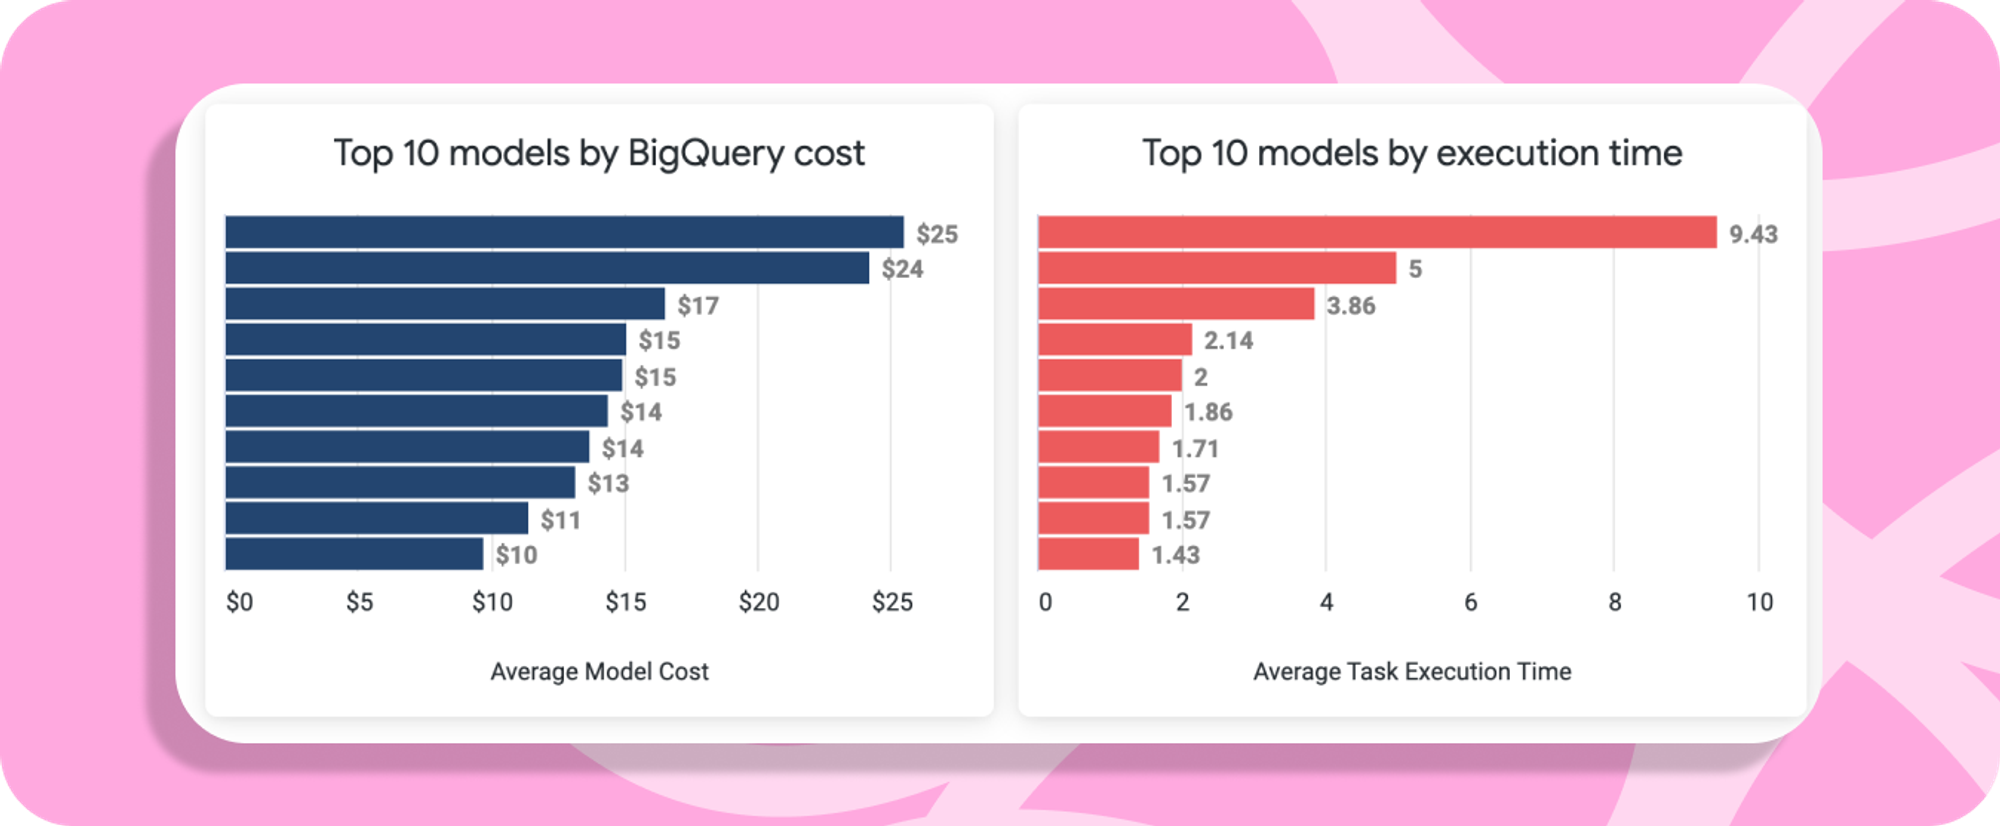 Two bar charts. The first is titled ‘Top 10 models by BigQuery cost’ and shows the cost of model costs in descending order. The second bar chart is entitled ‘Top 10 models by execution time’ and shows the execution time of dbt model tasks in descending order.